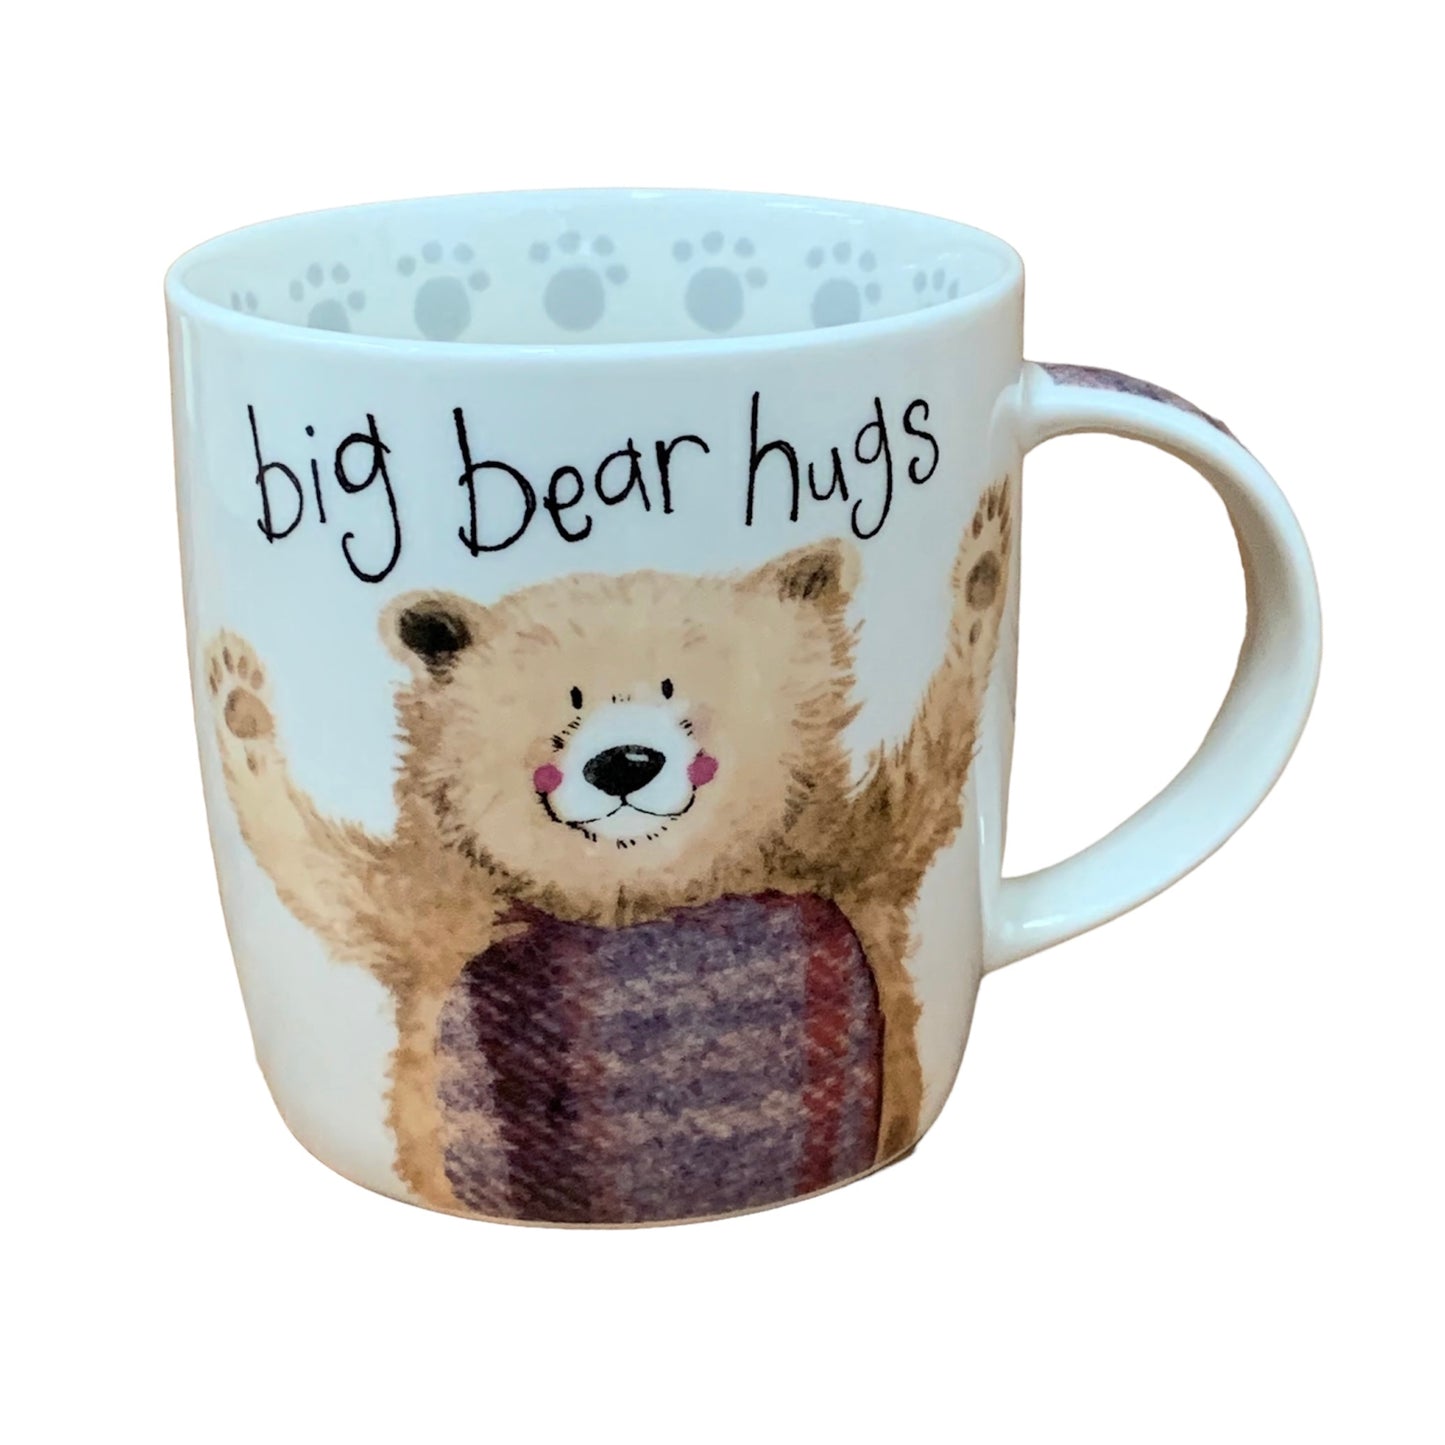 This Alex Clark mug is illustrated with a lovely bear with its arms open for a welcome hug, along with the words "big bear hugs" on the top of the mug.  This mug also features a bear paws illustration around the inside rim & illustrations down the handle.  